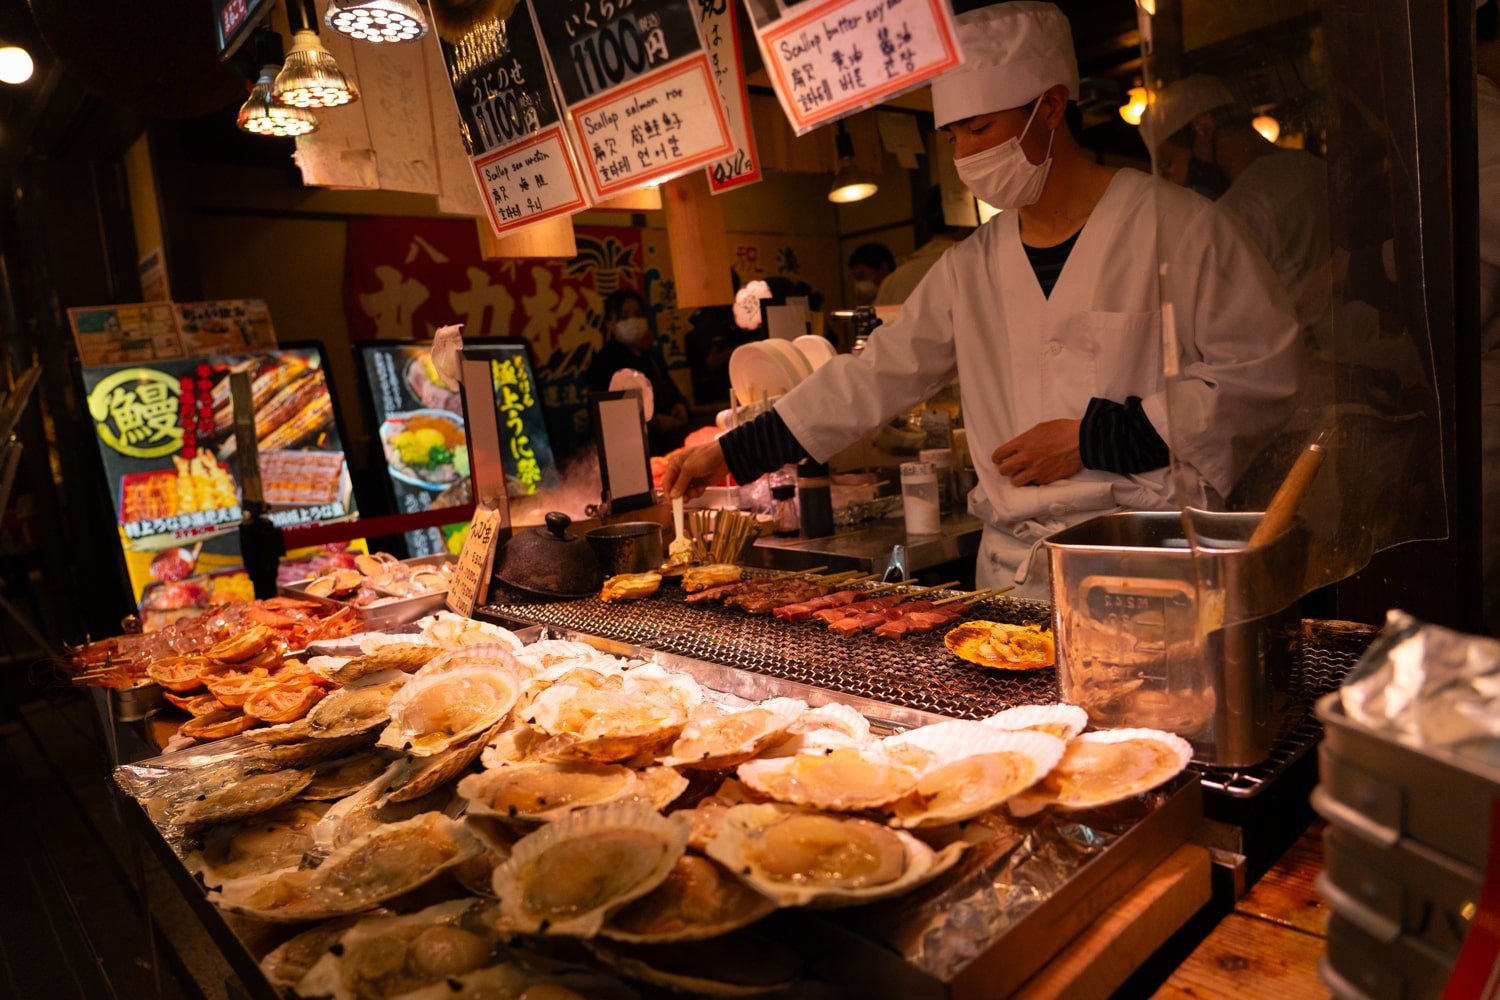 A chef prepares Japanese food such as oysters and yakitori on an outdoor grill at the Nishiki Market in Kyoto.